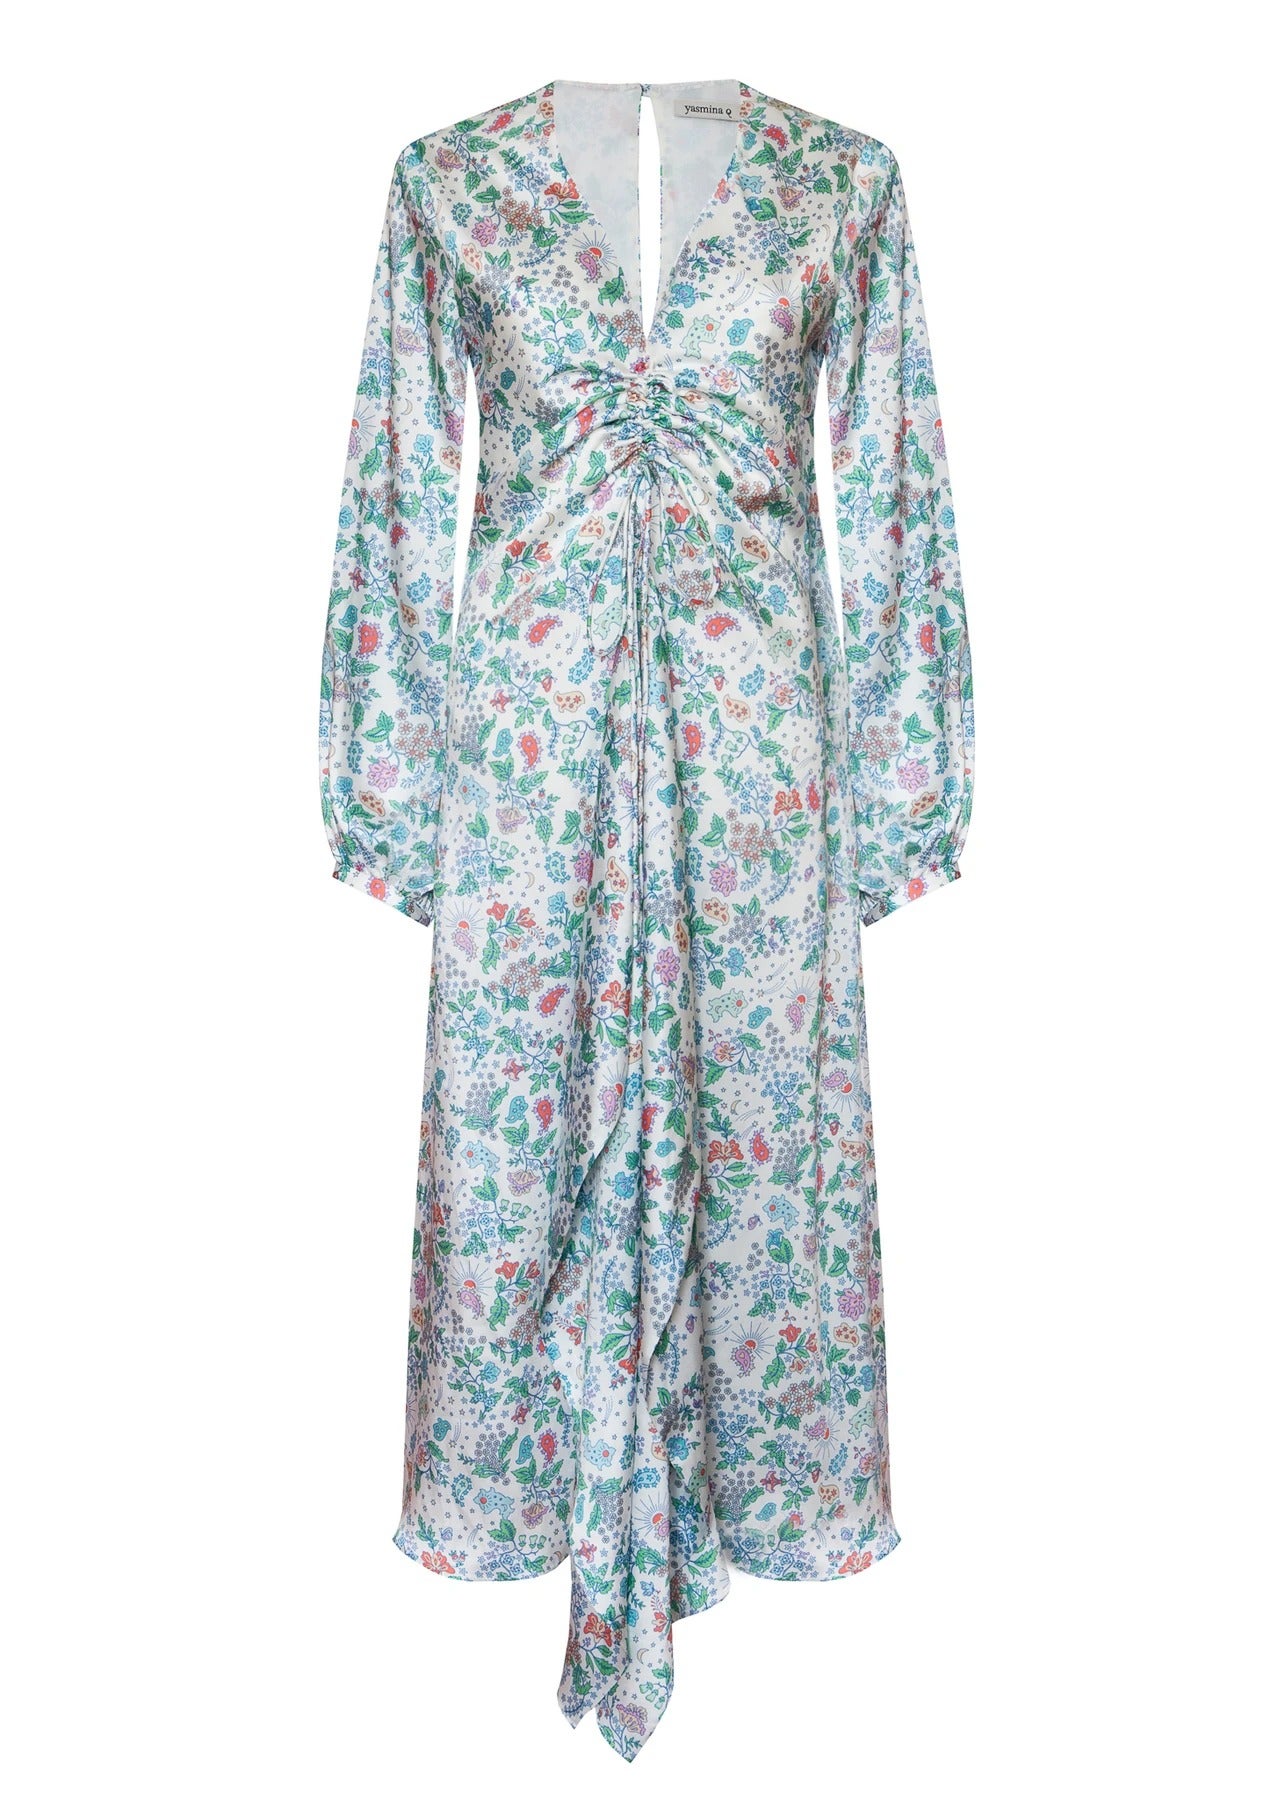 Yasmina Q + Colette Dress in Ivory and Meadow Print